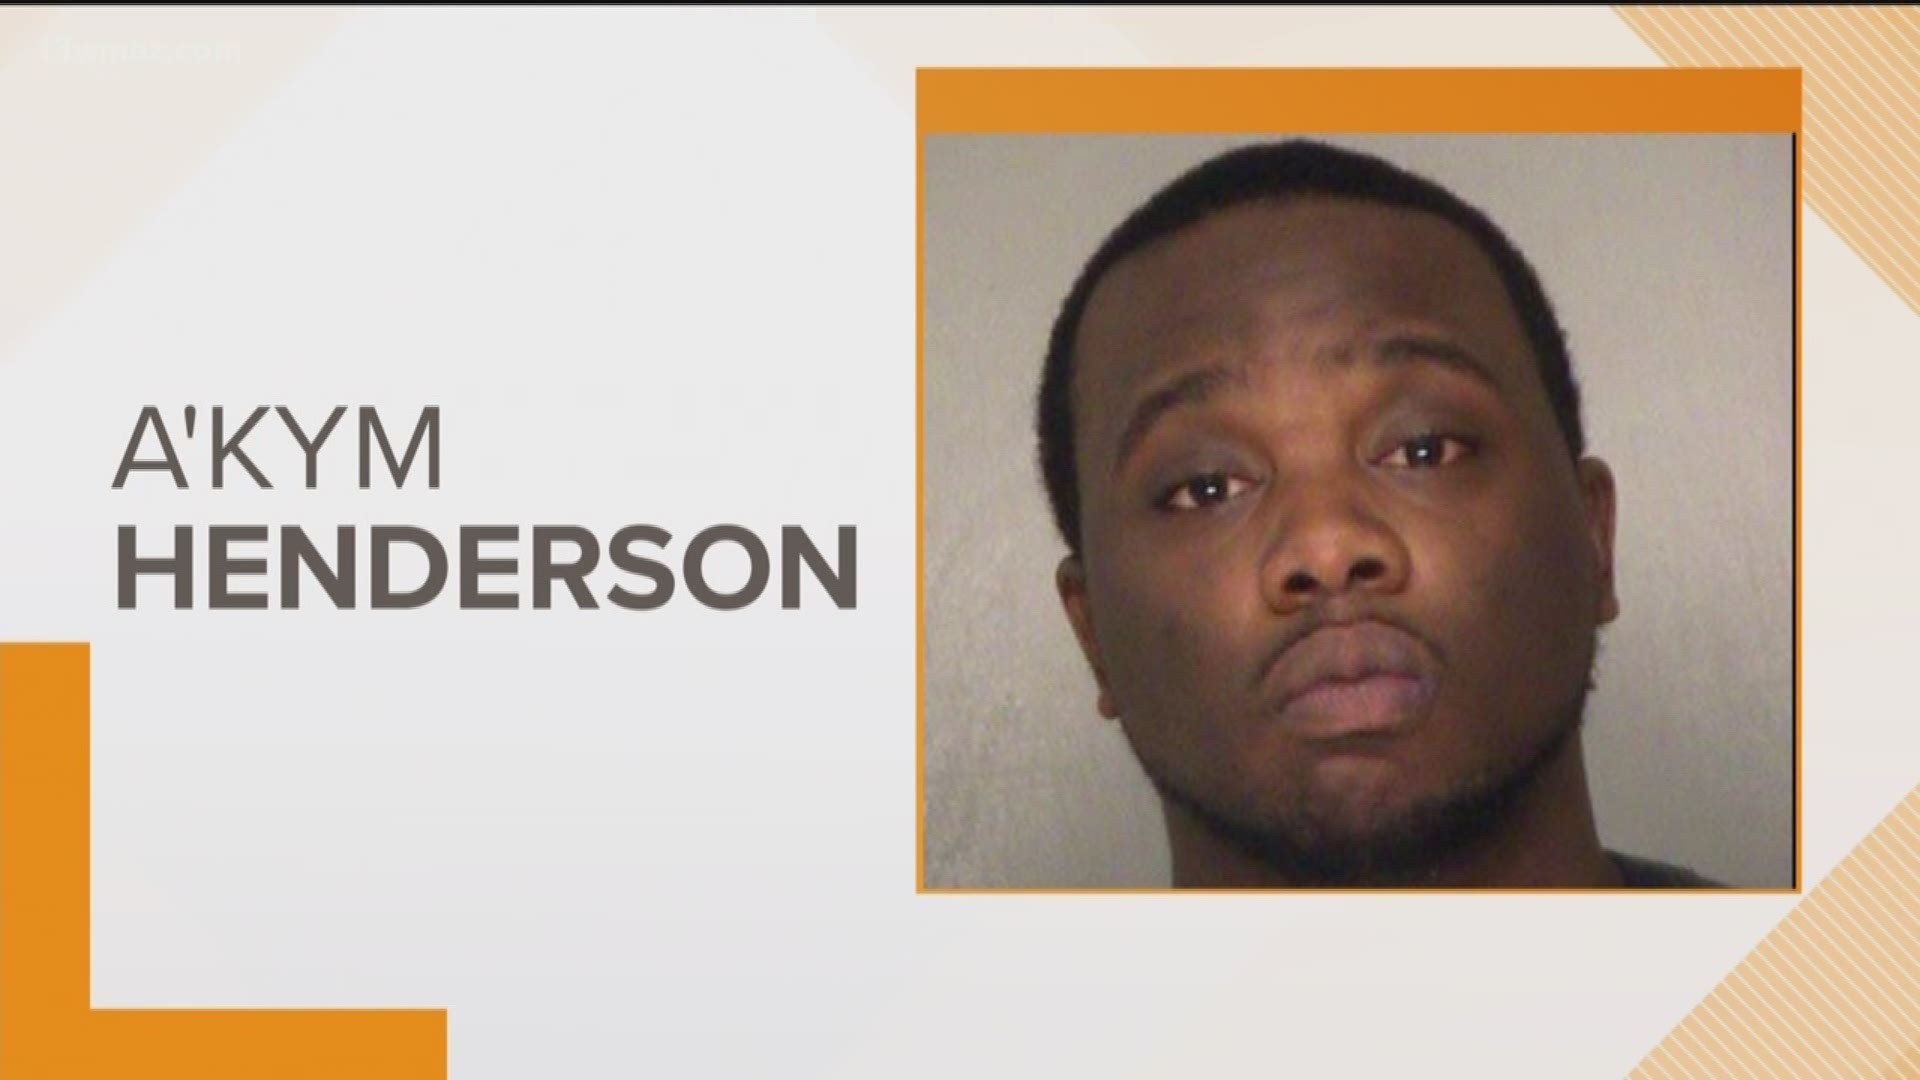 The child's mother found the baby unresponsive just after 1 a.m. Friday. Investigators discovered the baby had been allegedly hit in the head by his father, 21-year-old A'kym Henderson.